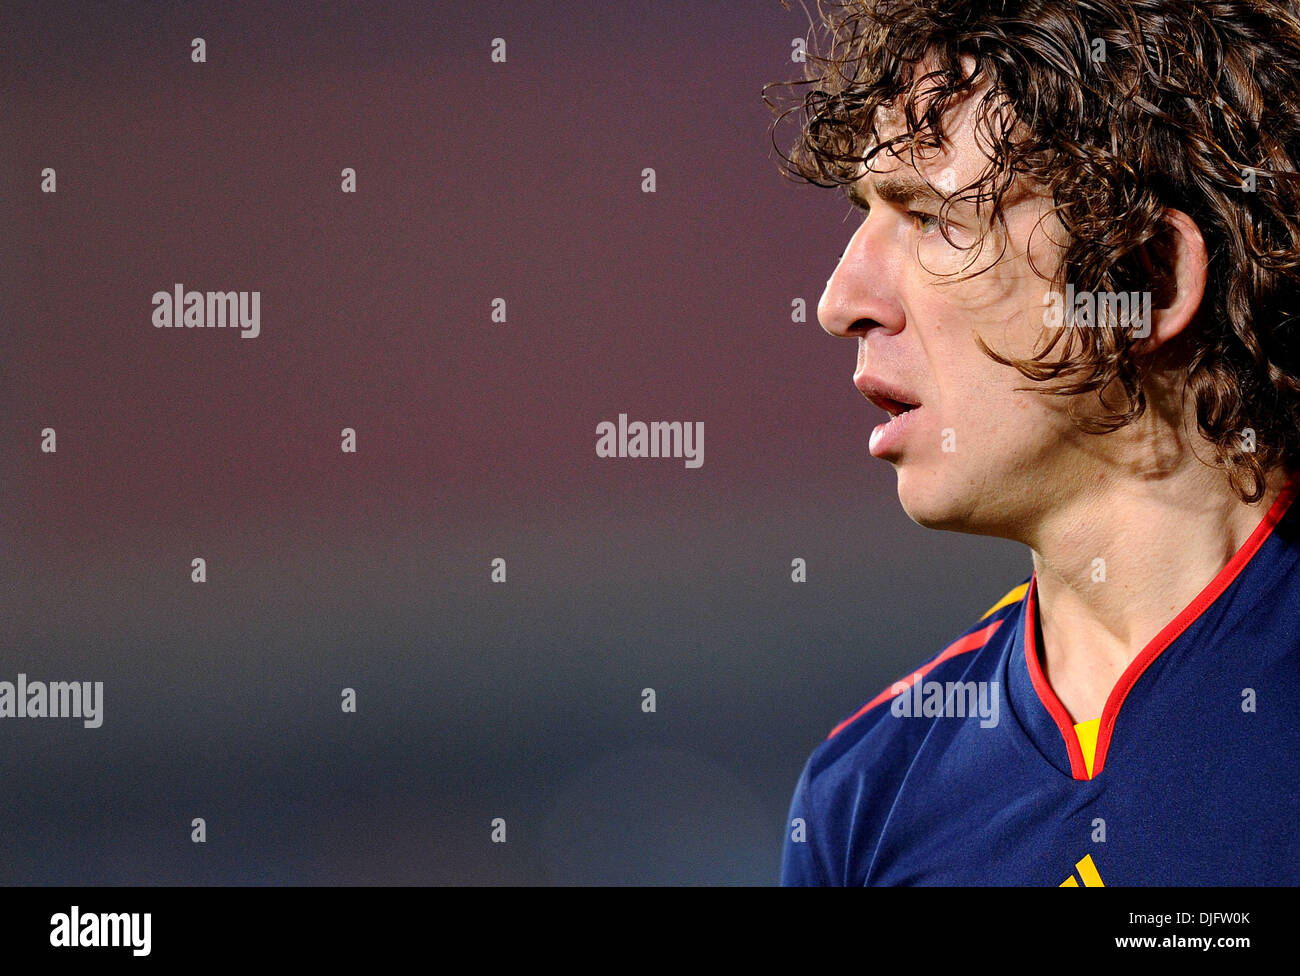 June 25, 2010 - Pretoria, South Africa - Carles Puyol of Spain is seen during the 2010 FIFA World Cup soccer match between Chile and Spain at Loftus Versfeld Stadium on June 25, 2010 in Pretoria, South Africa. (Credit Image: © Luca Ghidoni/ZUMApress.com) Stock Photo